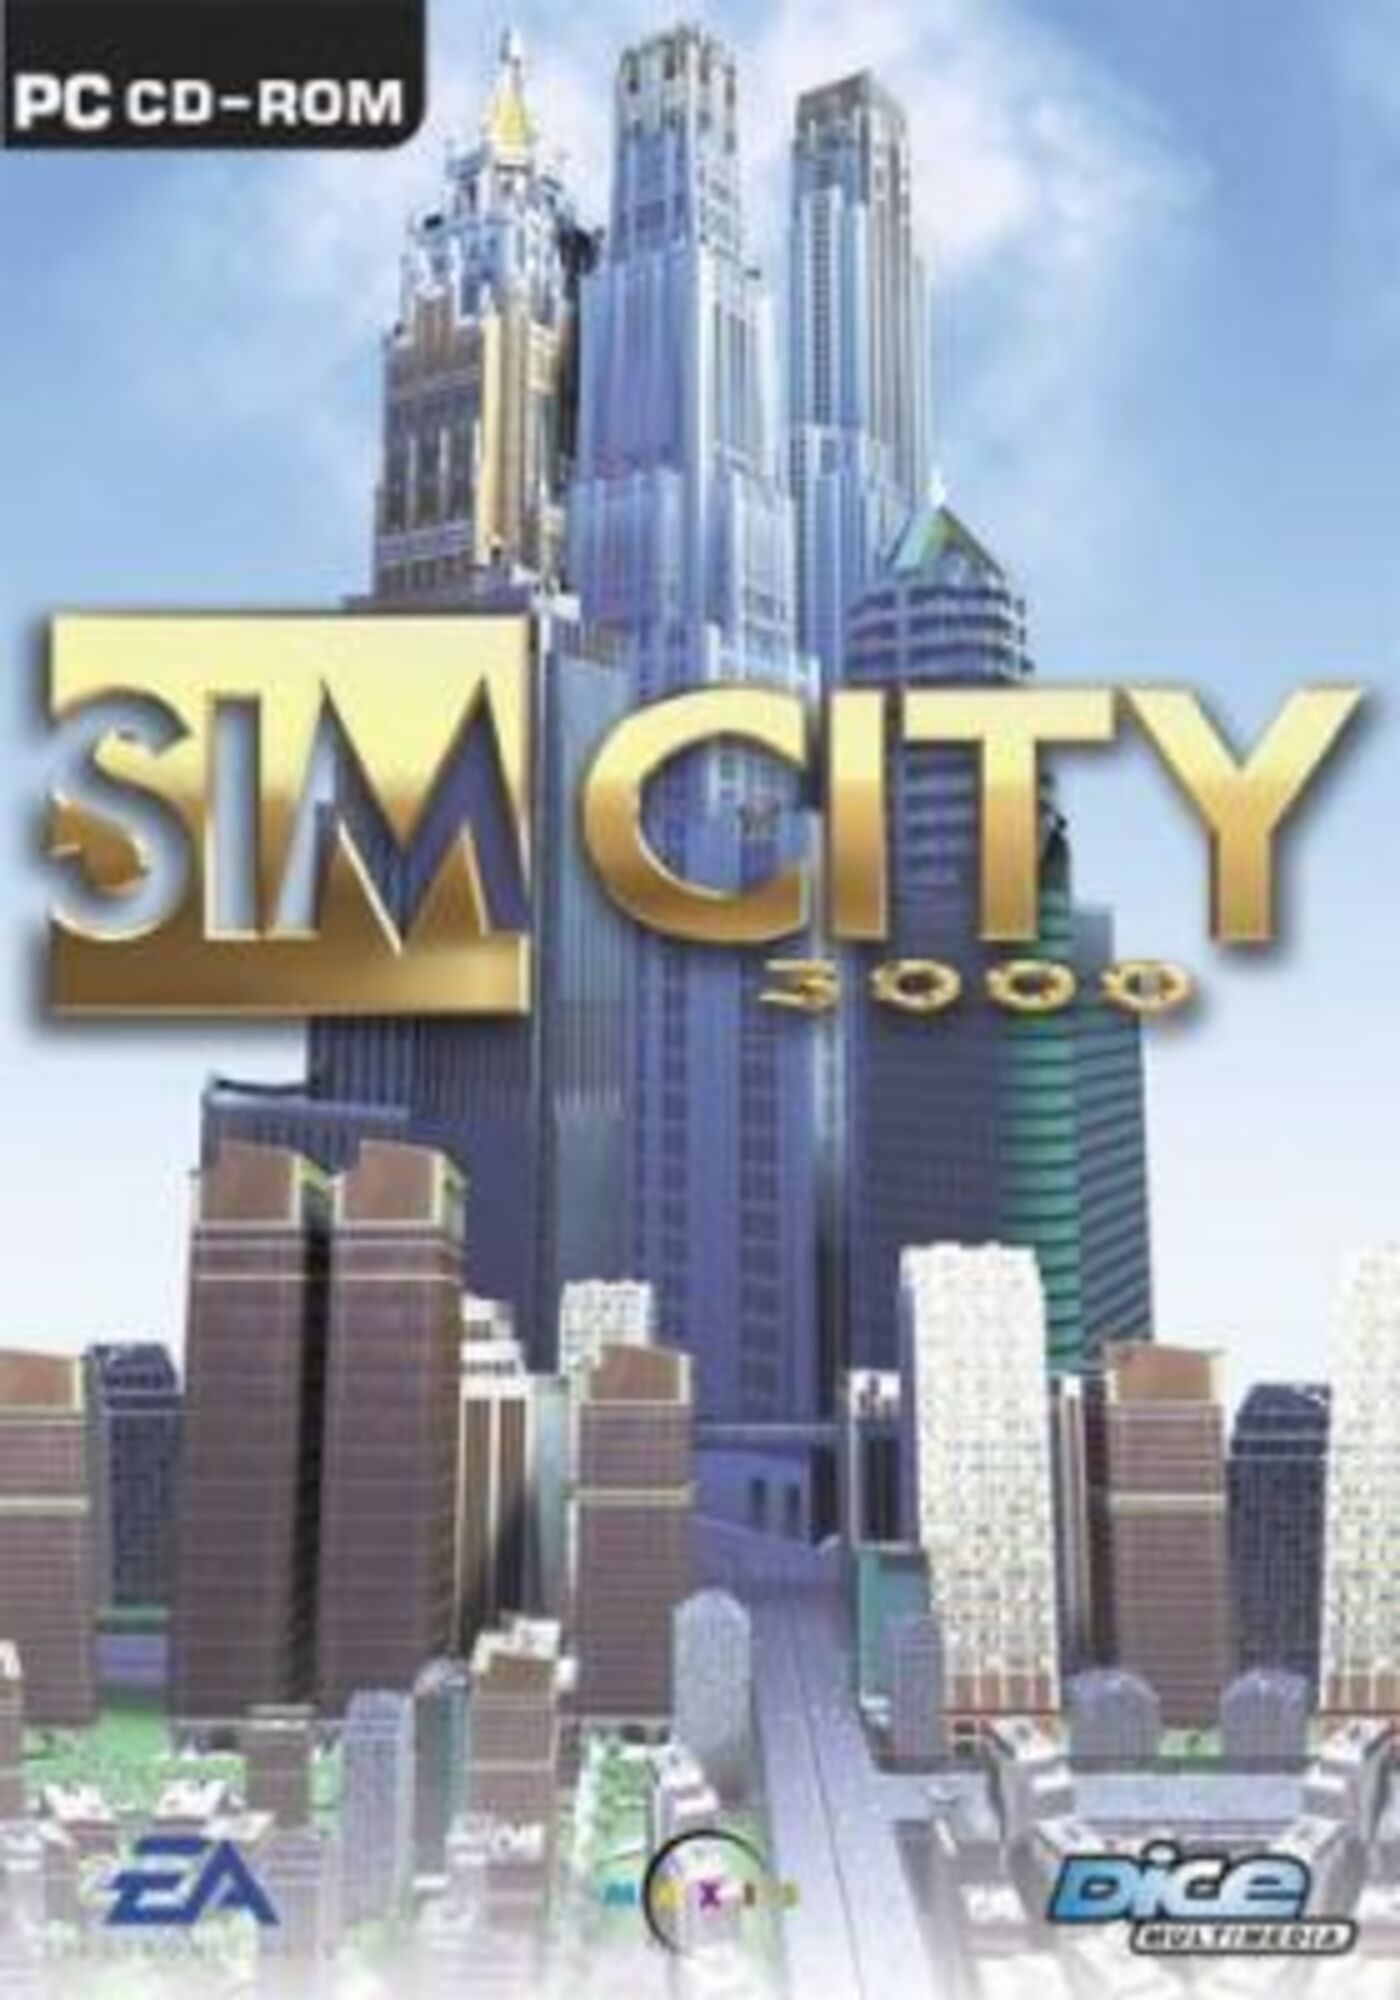 simcity 3000 review